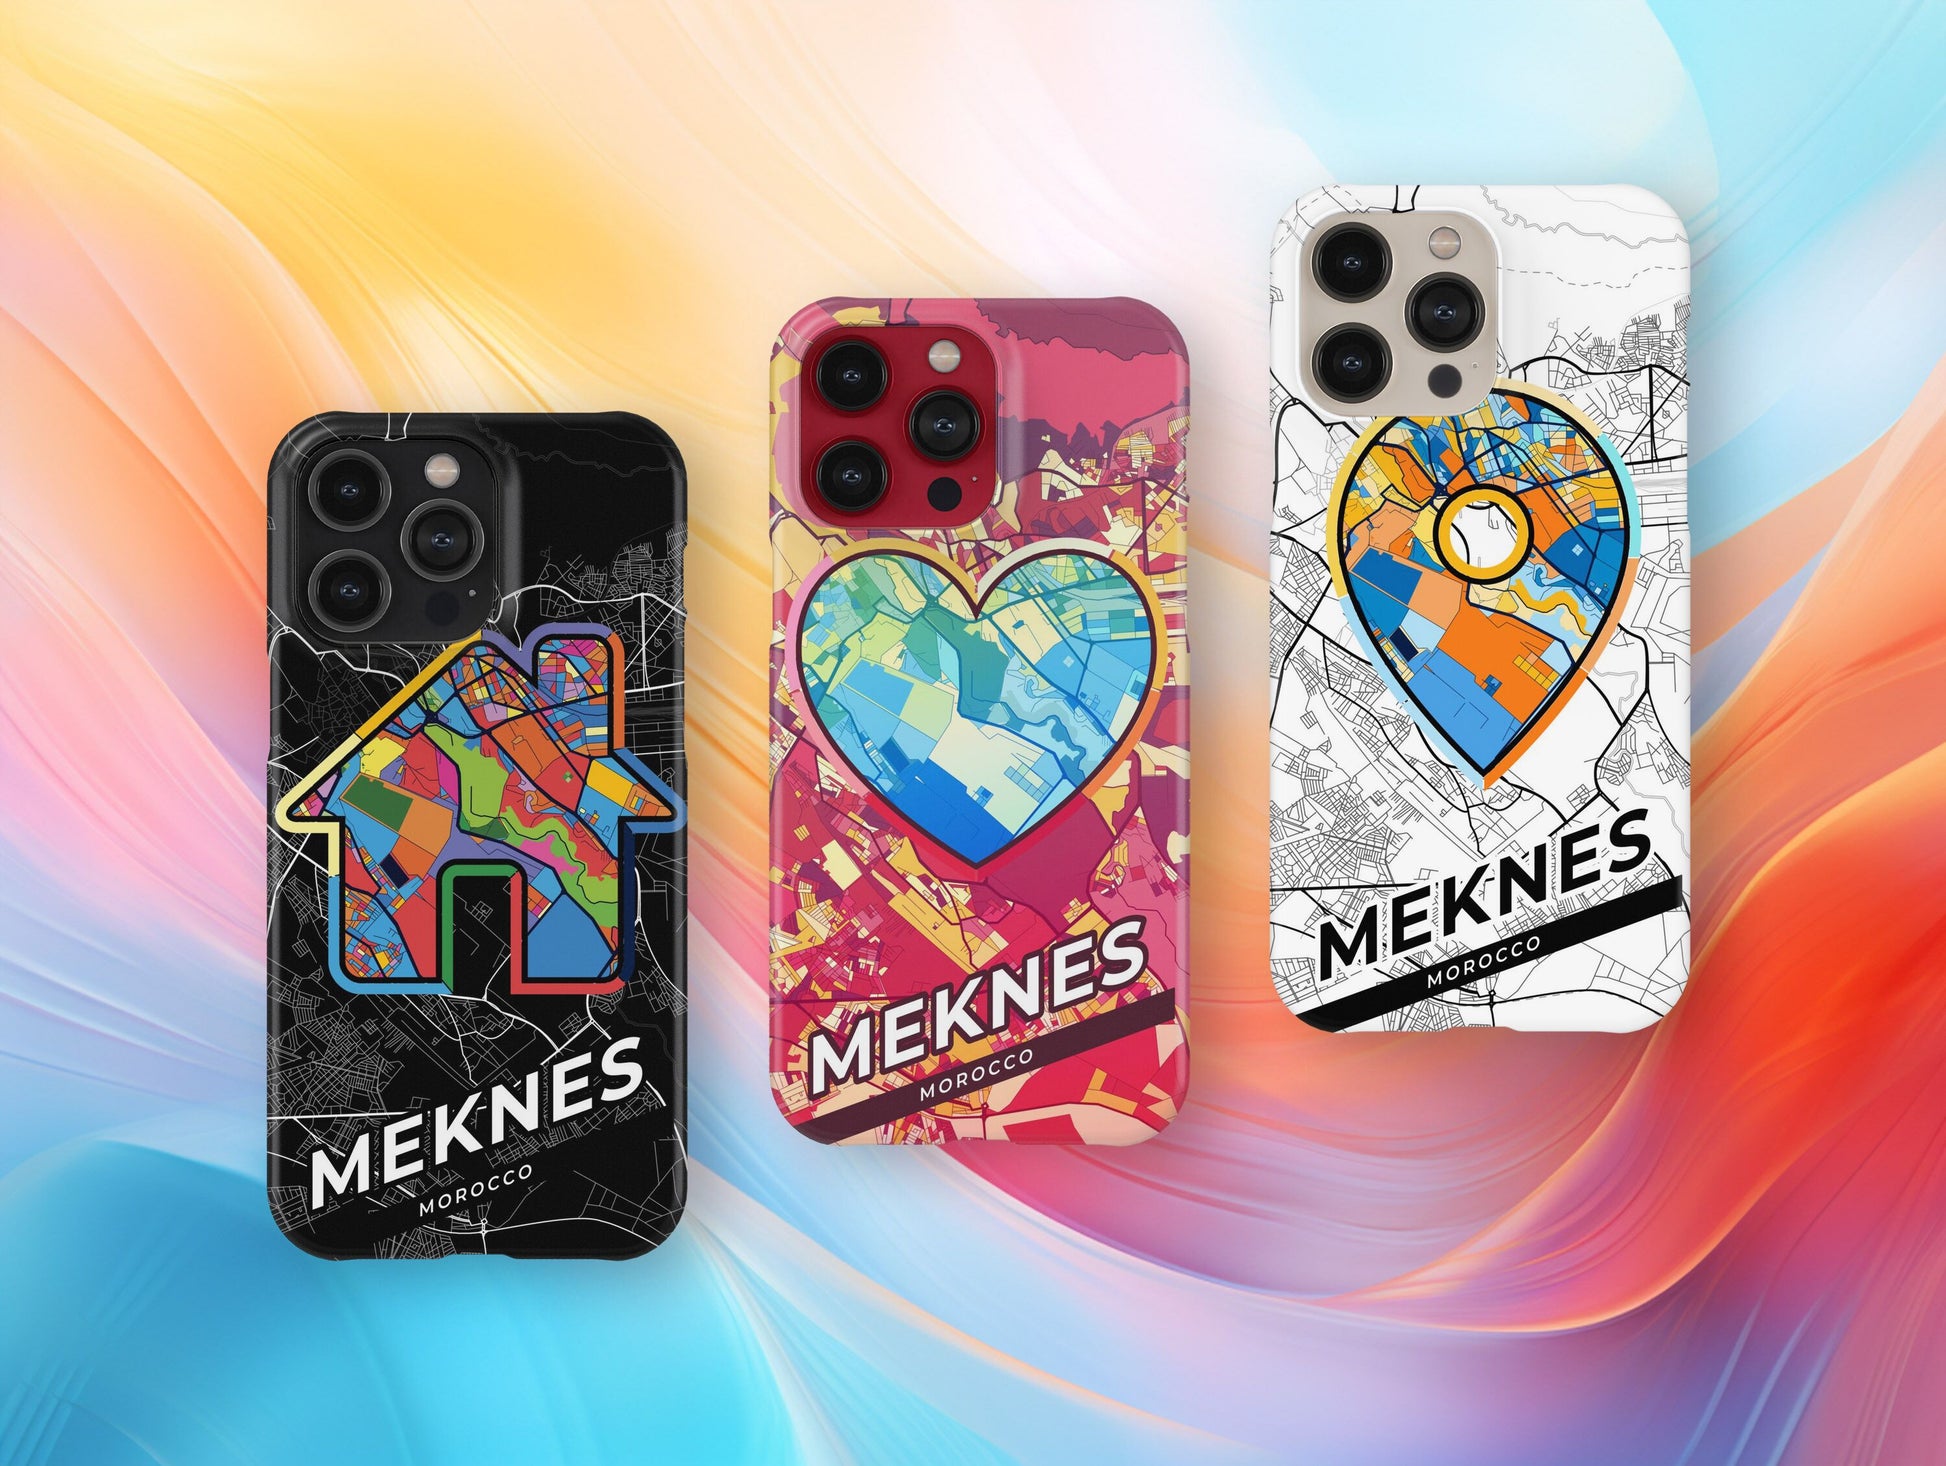 Meknes Morocco slim phone case with colorful icon